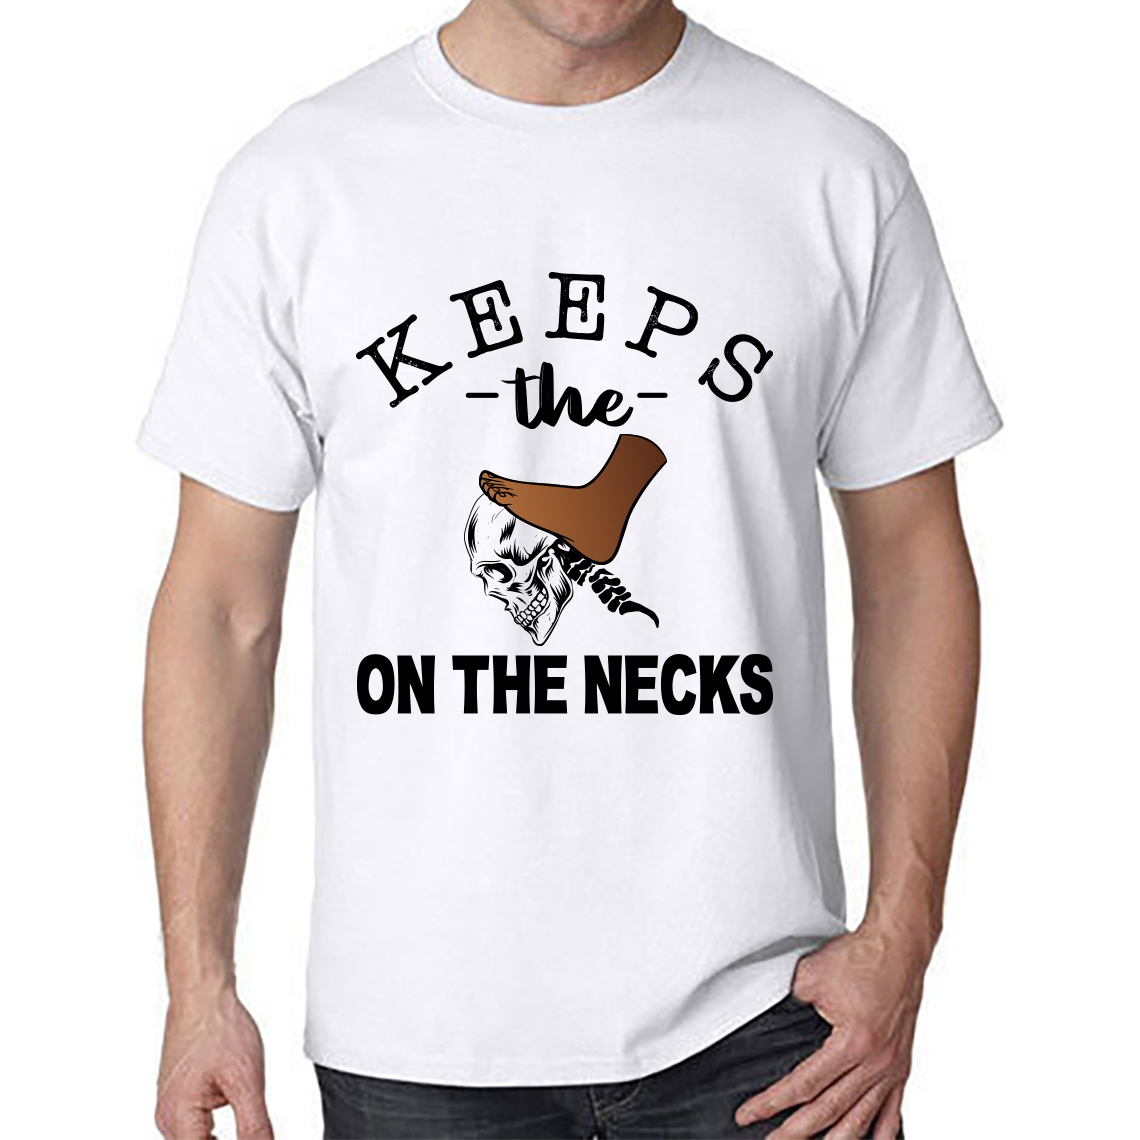 T shirt design keeps the foot on the neck